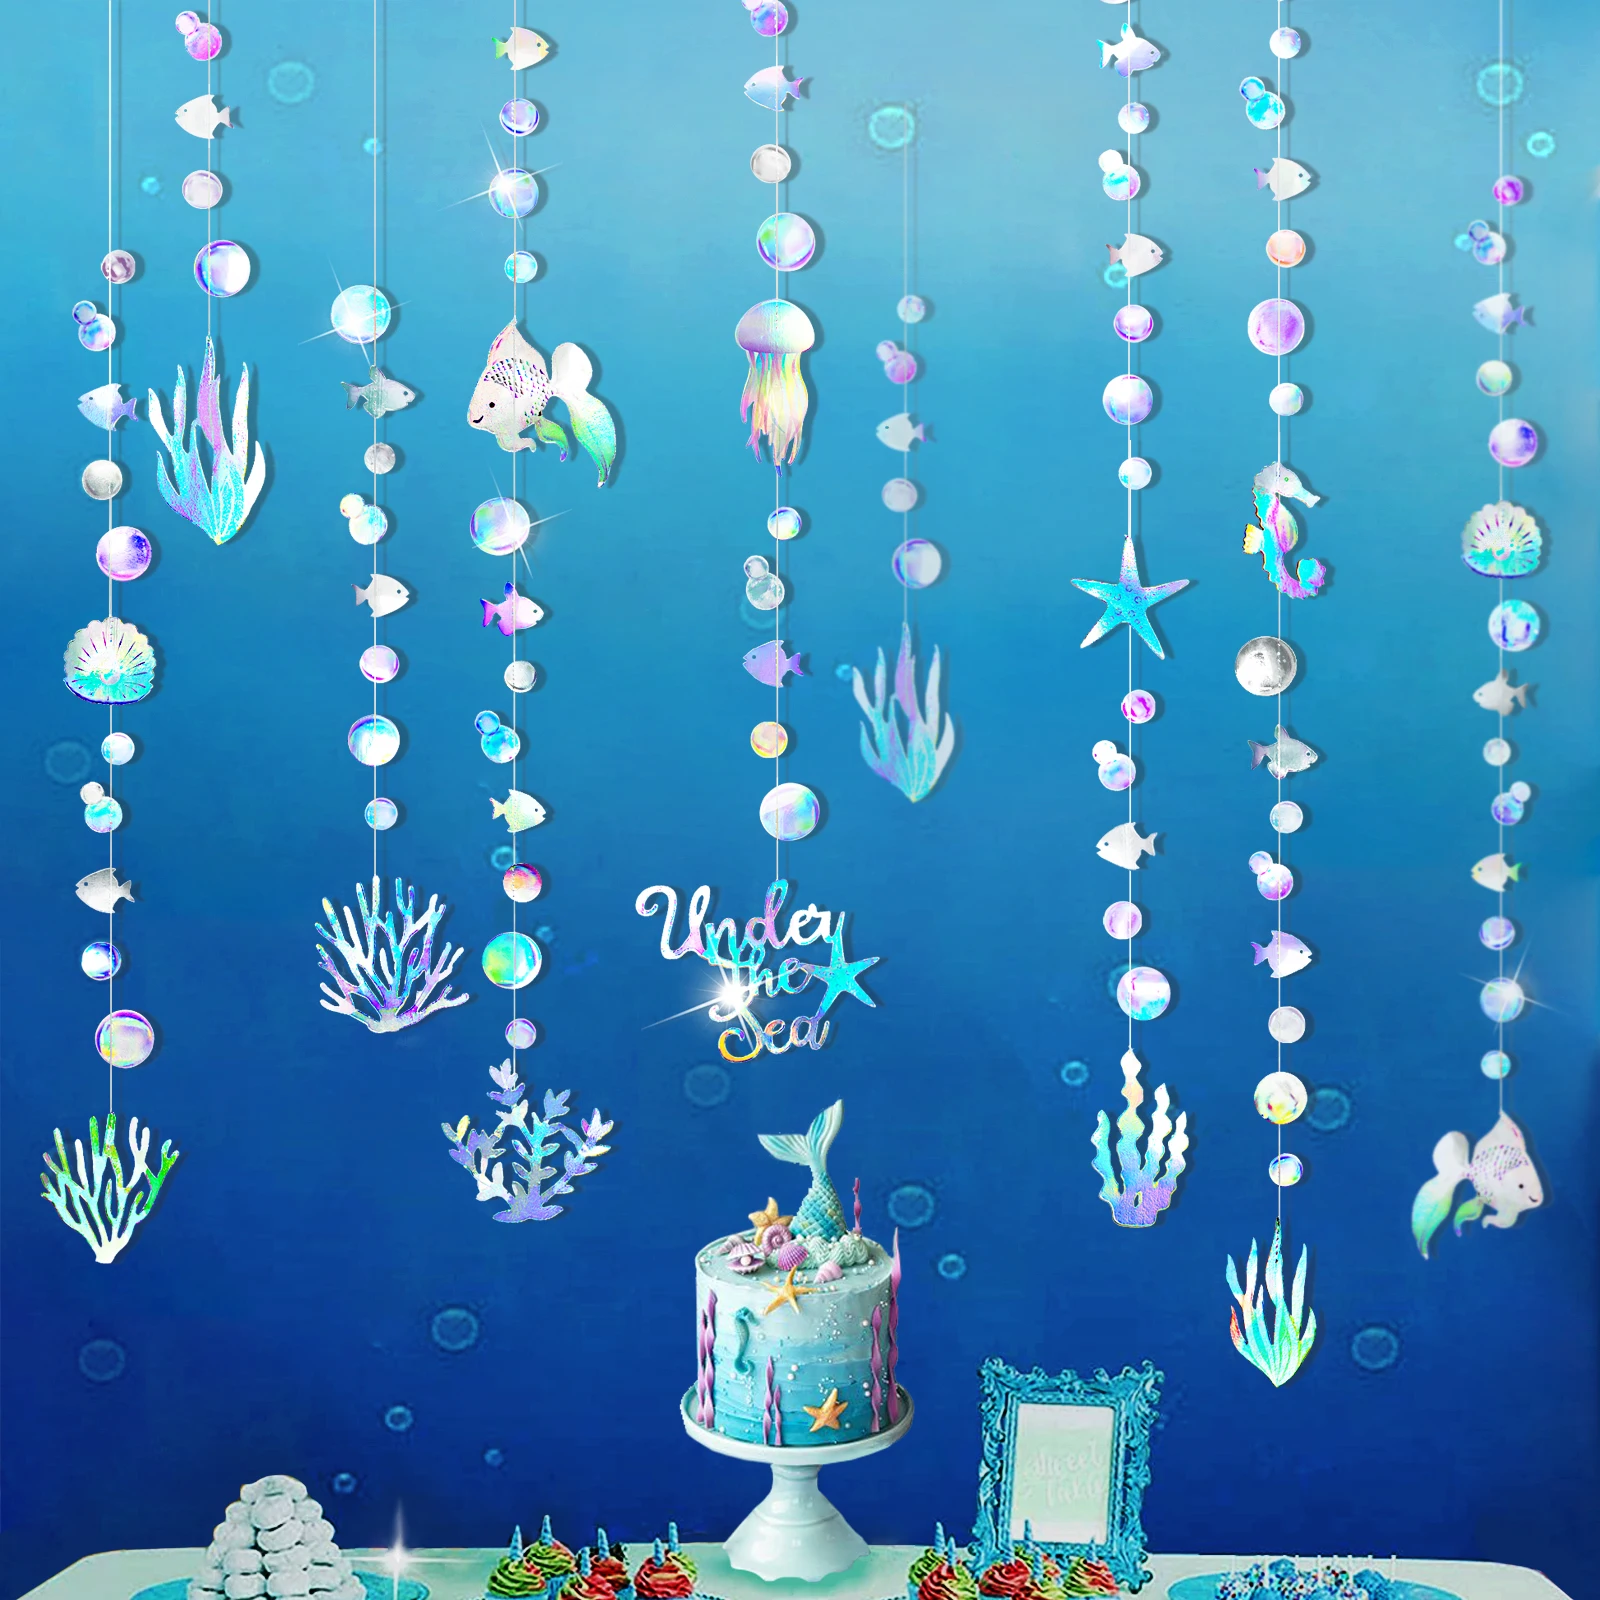 https://ae01.alicdn.com/kf/H597b75d7340e4ae4bf0714d894843df7Q/Under-the-Sea-Birthday-Themed-Party-Decorations-Seashell-Starfish-Seaweed-Seahorse-Table-Ornaments-Baby-Shower-Hanging.jpeg